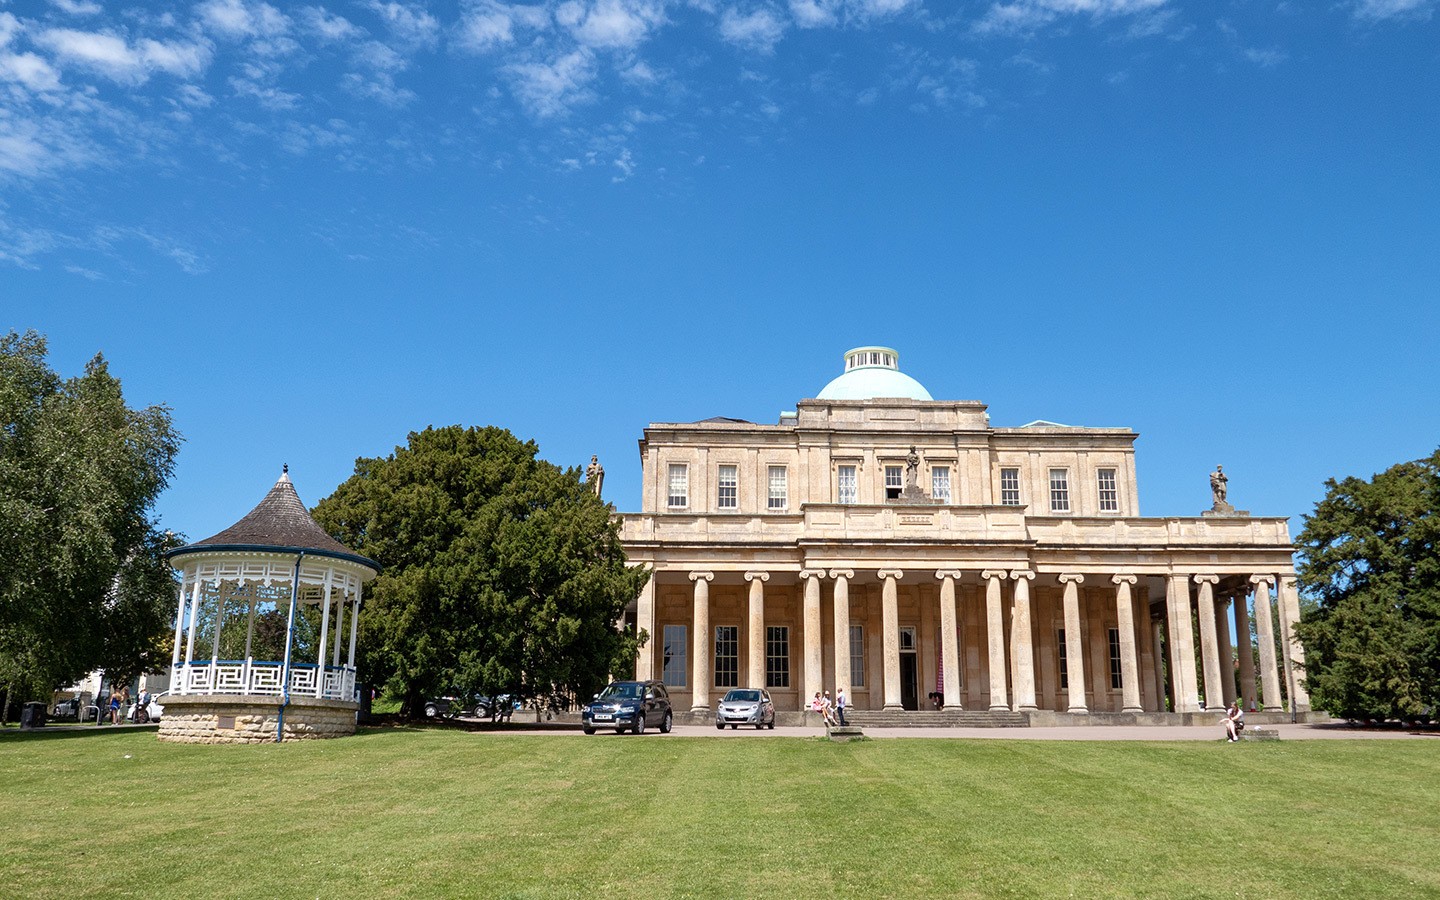 The Pittville Pump Room and park in Cheltenham, an alternative to visiting Bath